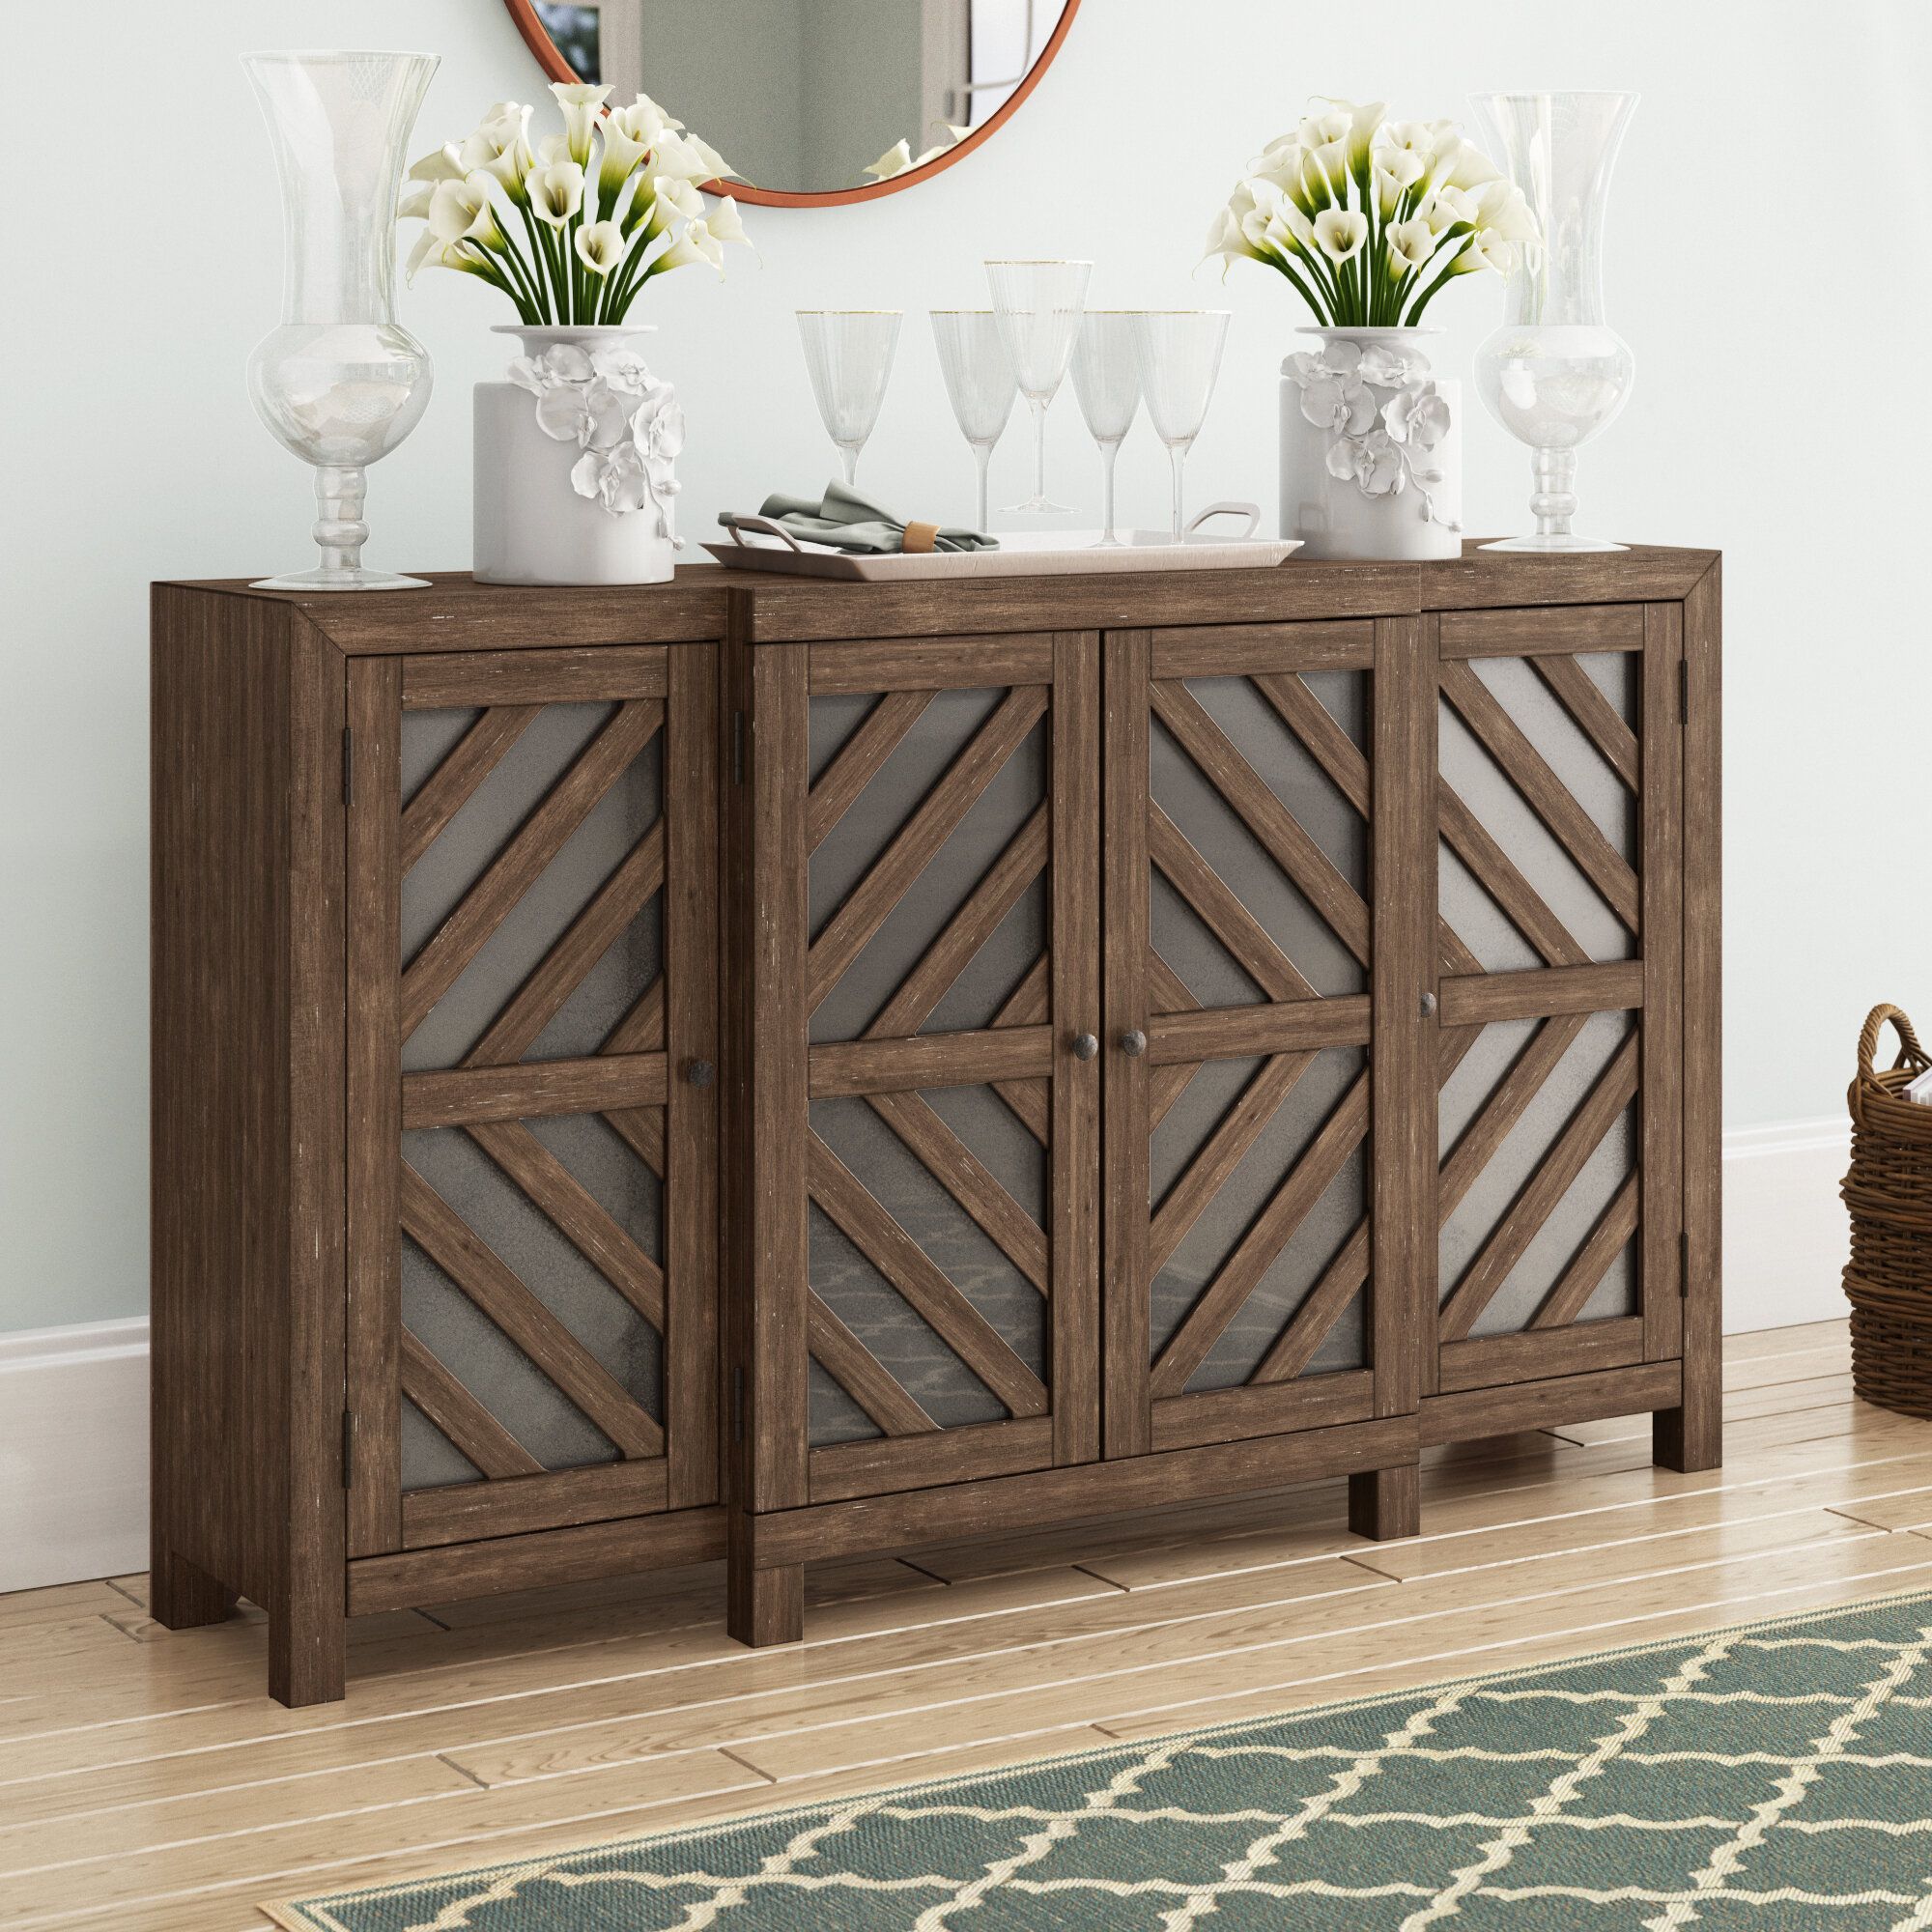 Slim Credenza | Wayfair Within Latest Caines Credenzas (View 4 of 20)